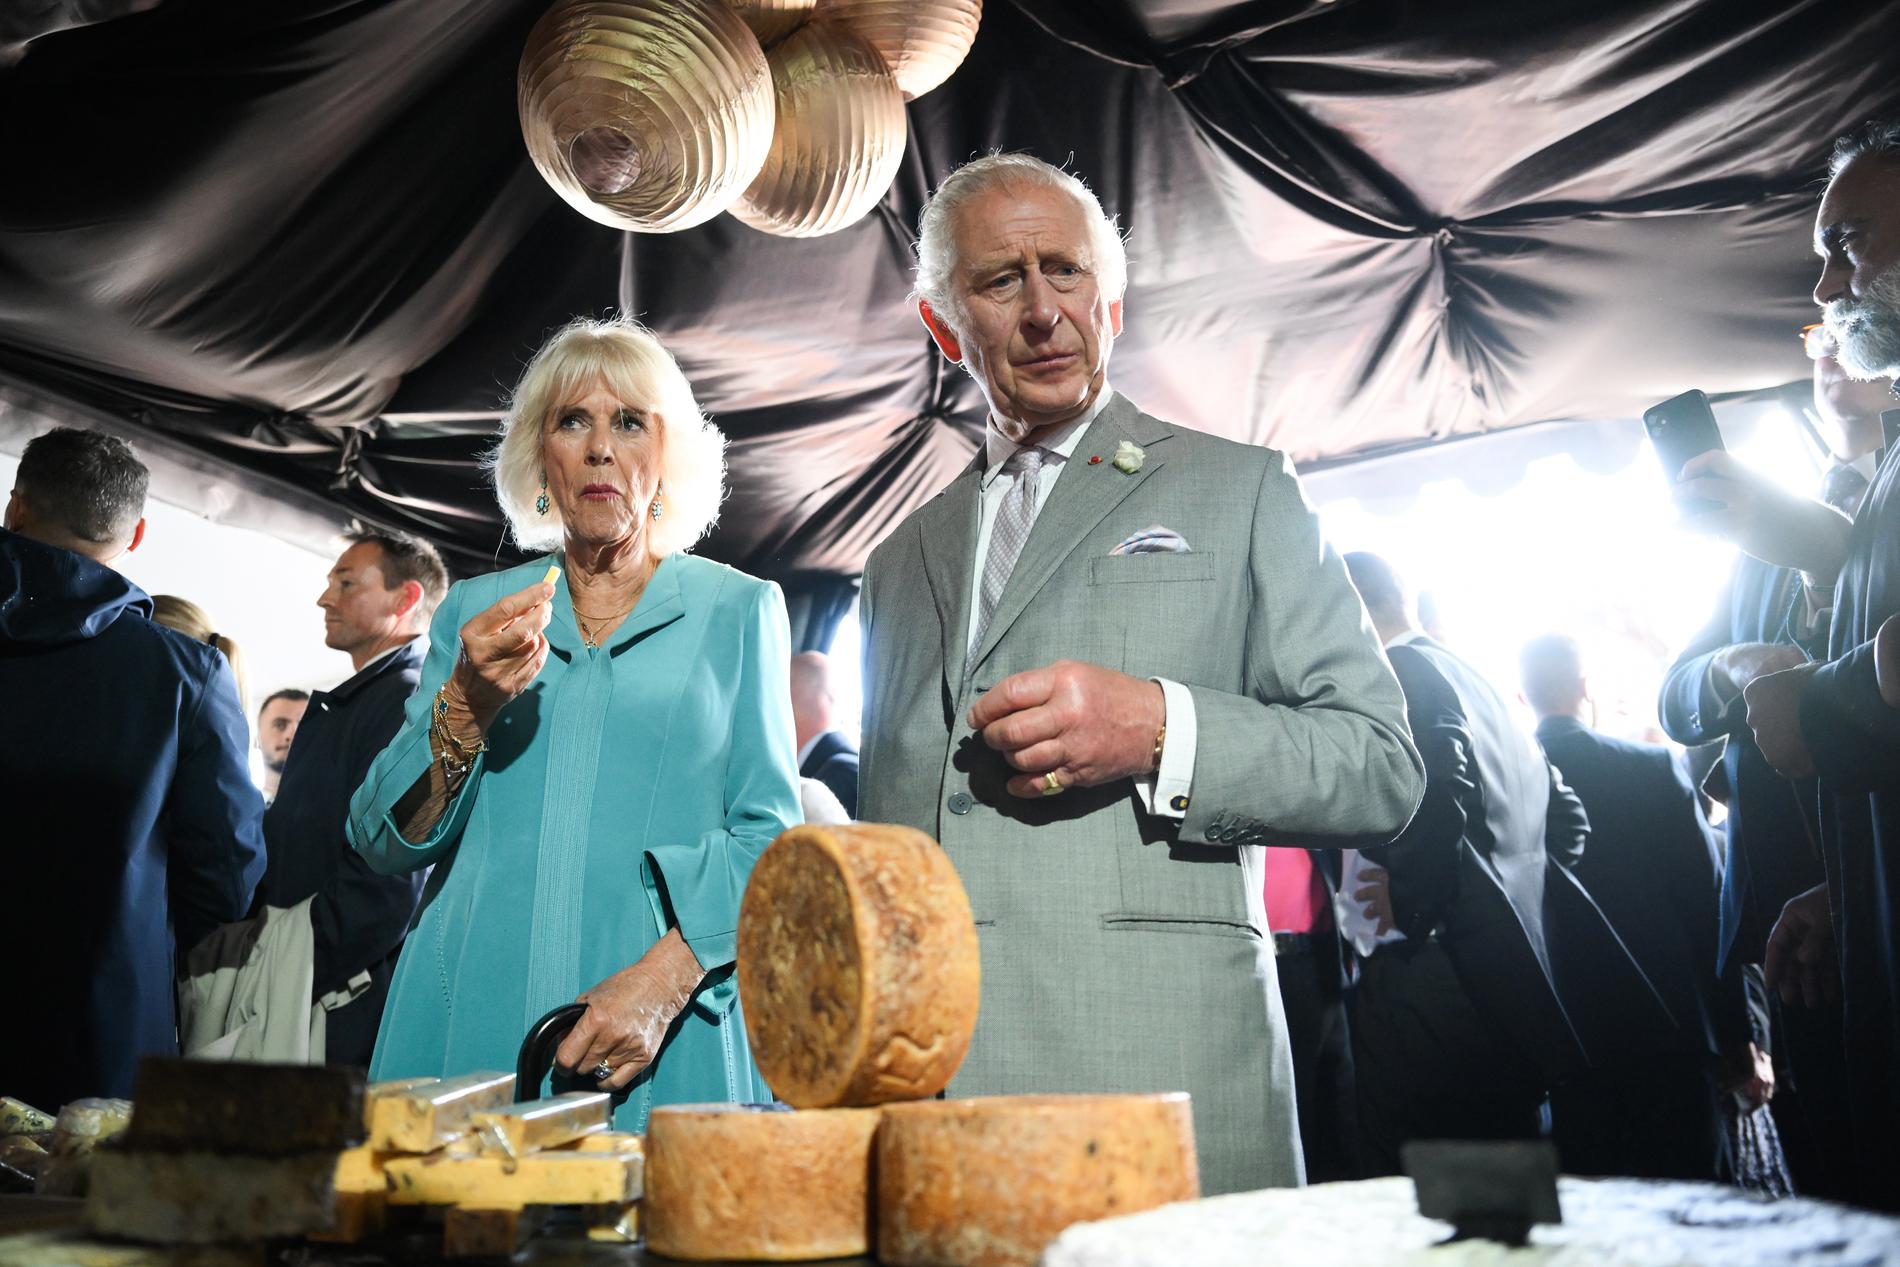 Tasting: Various cheeses were served to Queen Camilla and King Charles.